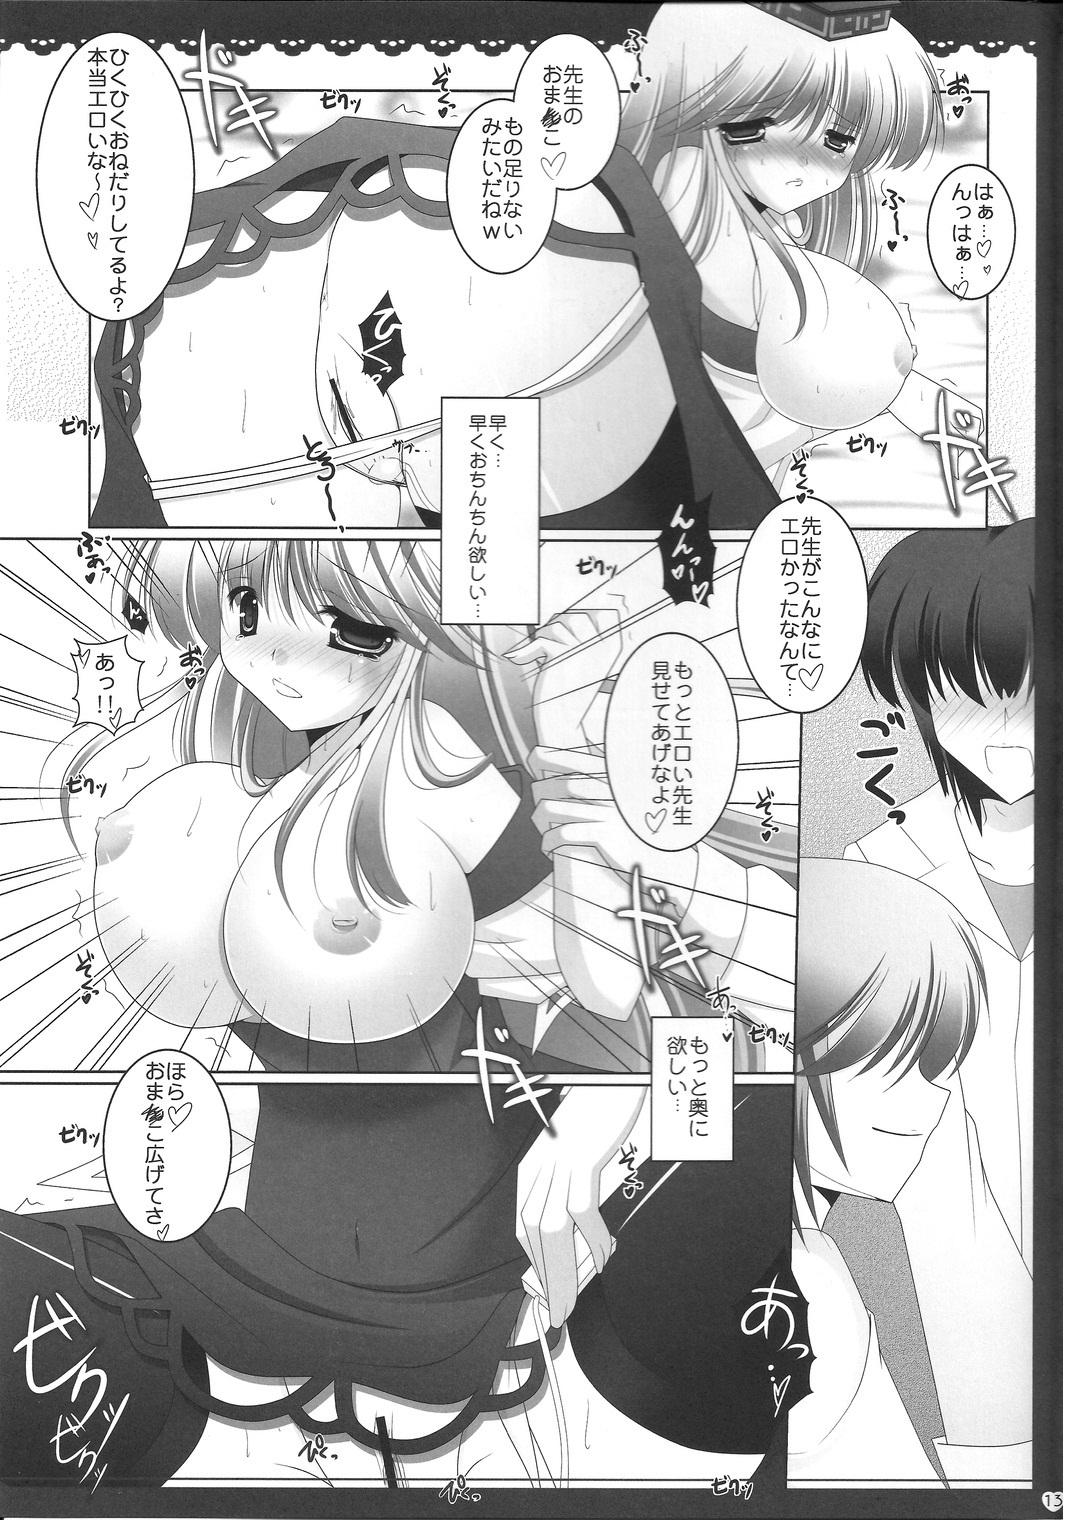 Thylinh meaning of love 2 - Touhou project Gaypawn - Page 12